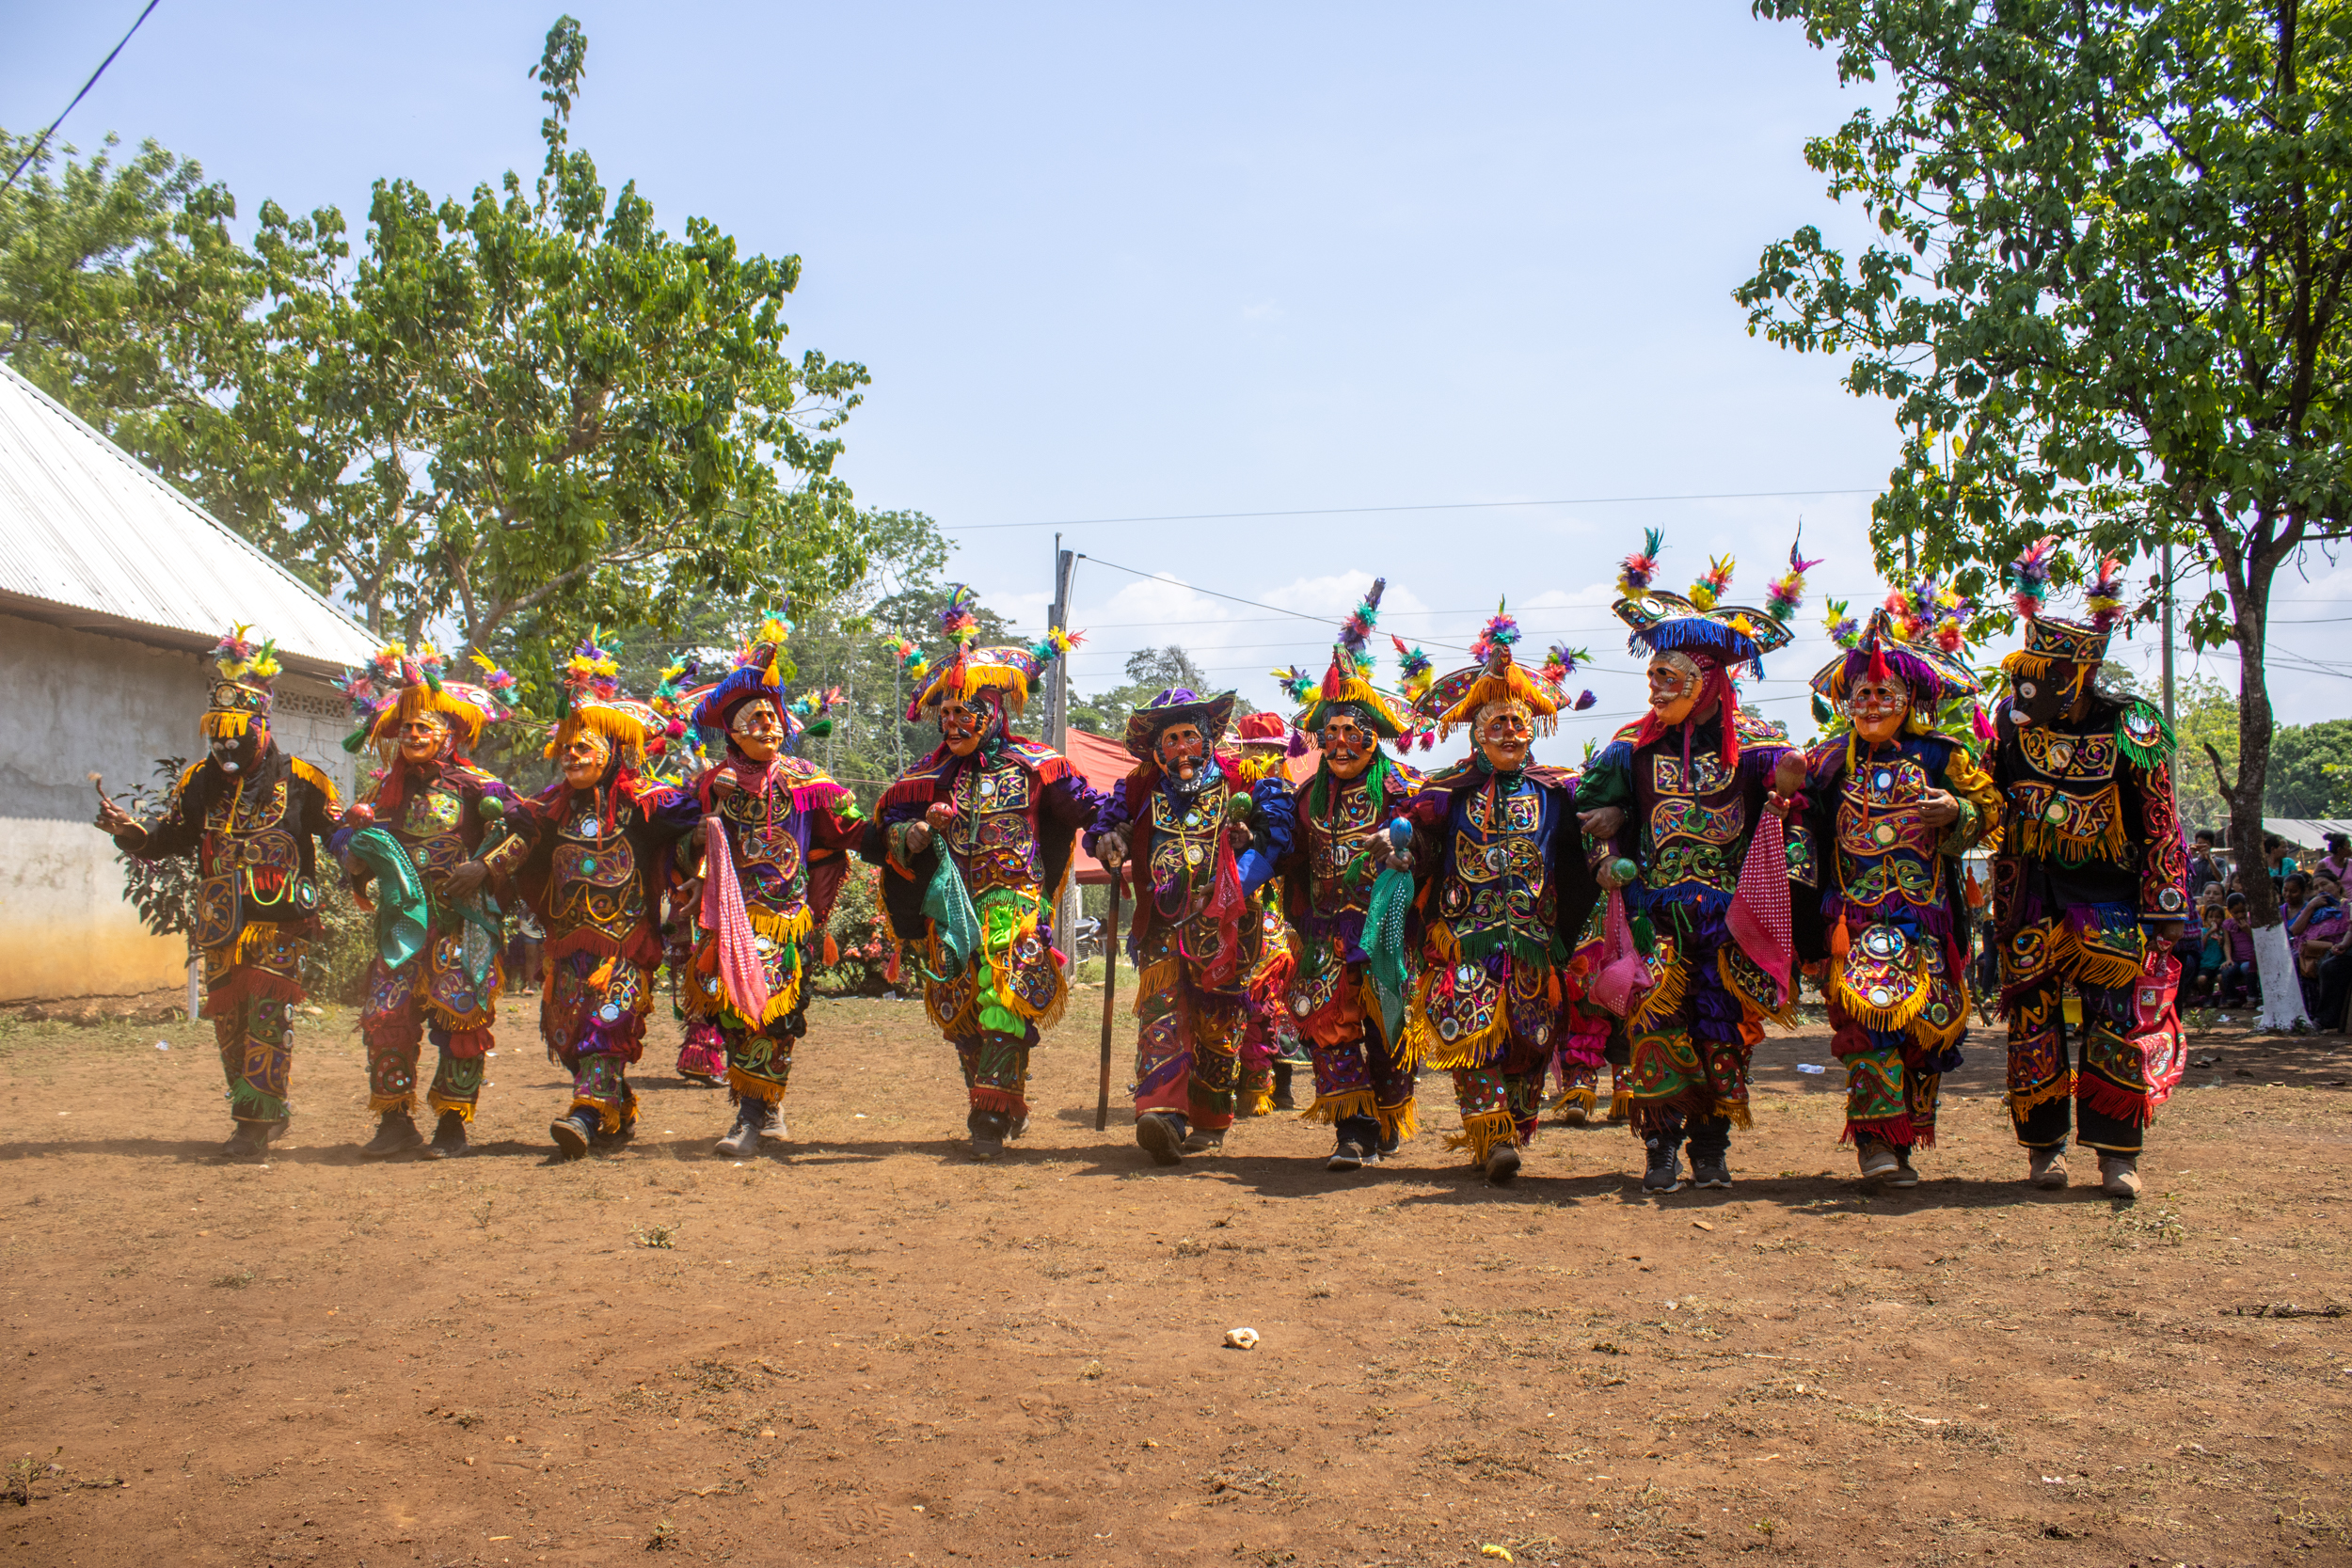 Group of indigenous people from the Unión Maya Itza Cooperative in Guatamela performing the Deer Dance ritual with traditional clothing. 
The “Indigenous Innovative Solutions” Photography Contest Winners
Name of the photo: The Dance of the Deer. 
Author: Nazario Tiul Choc